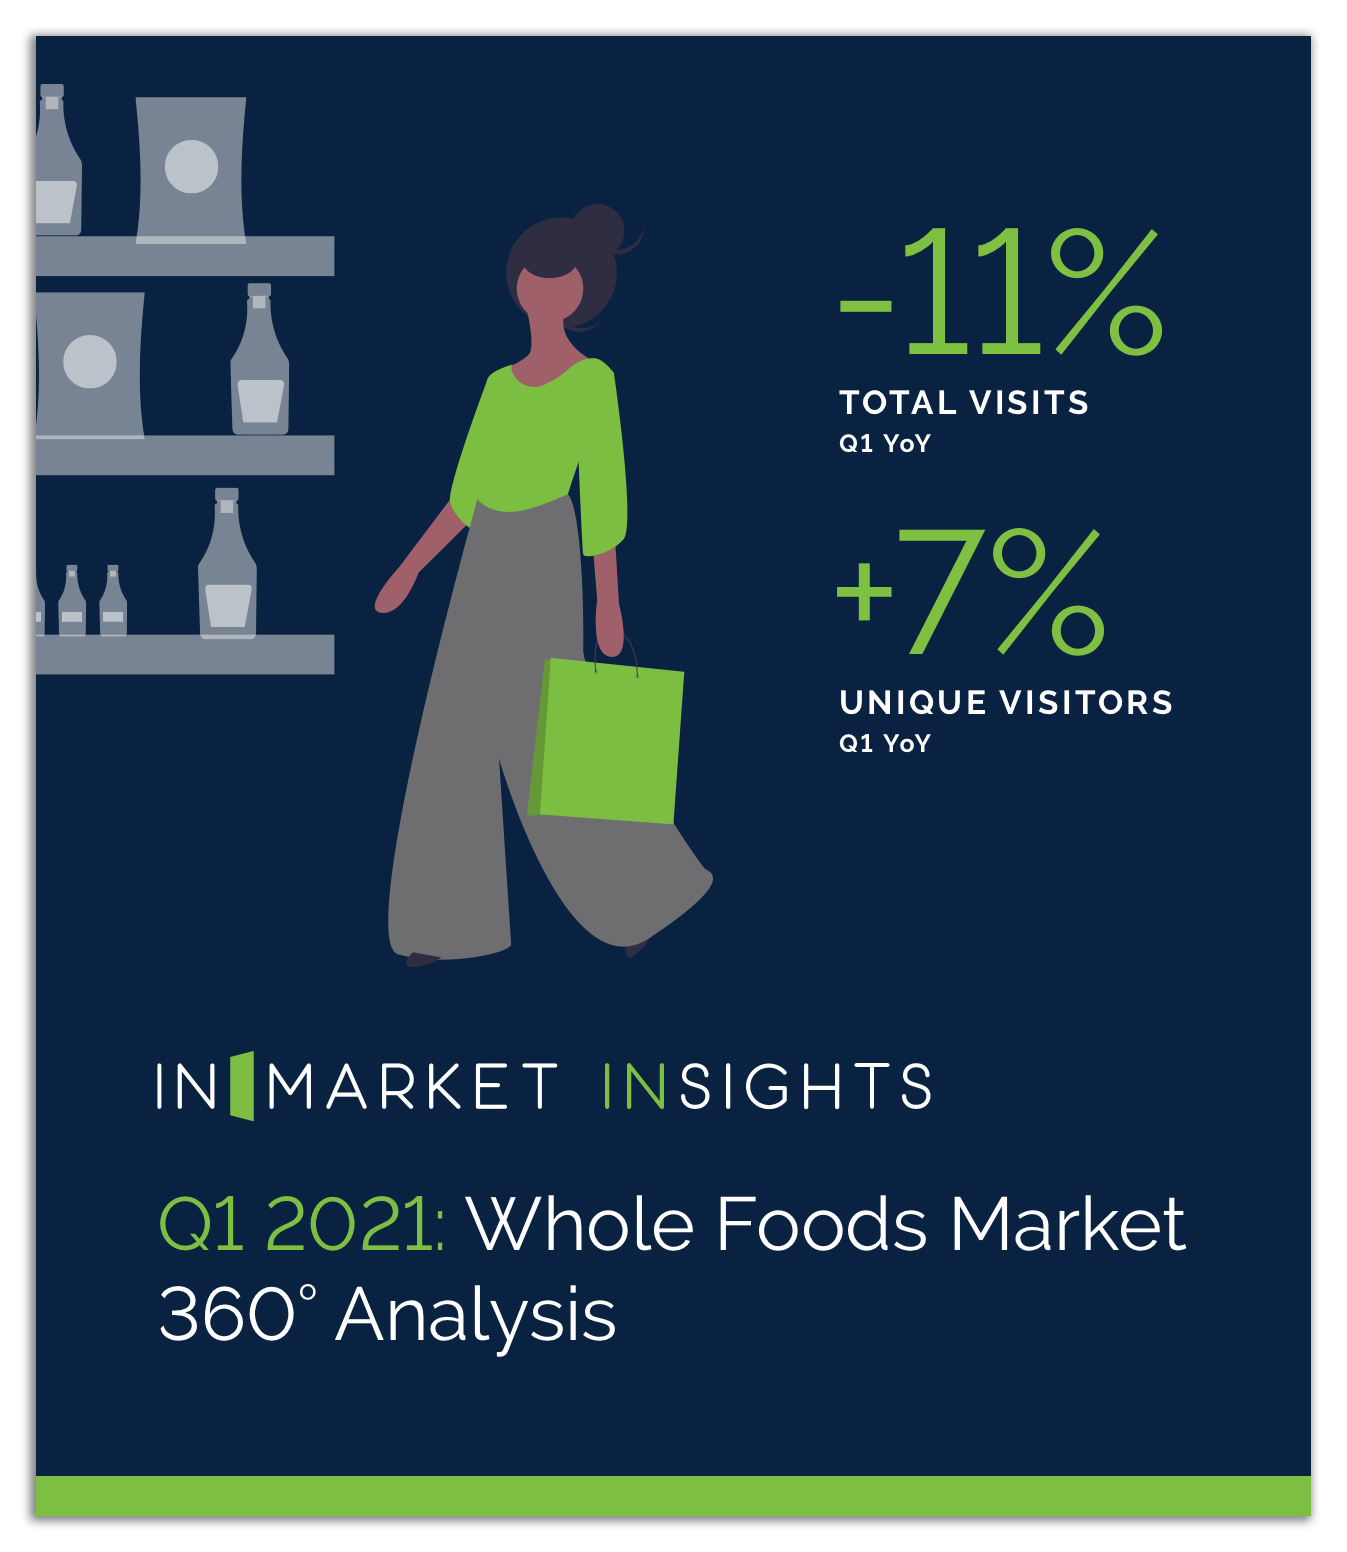 Inmarket Insights Q1 2021 Whole Foods Market 360 Analysis 